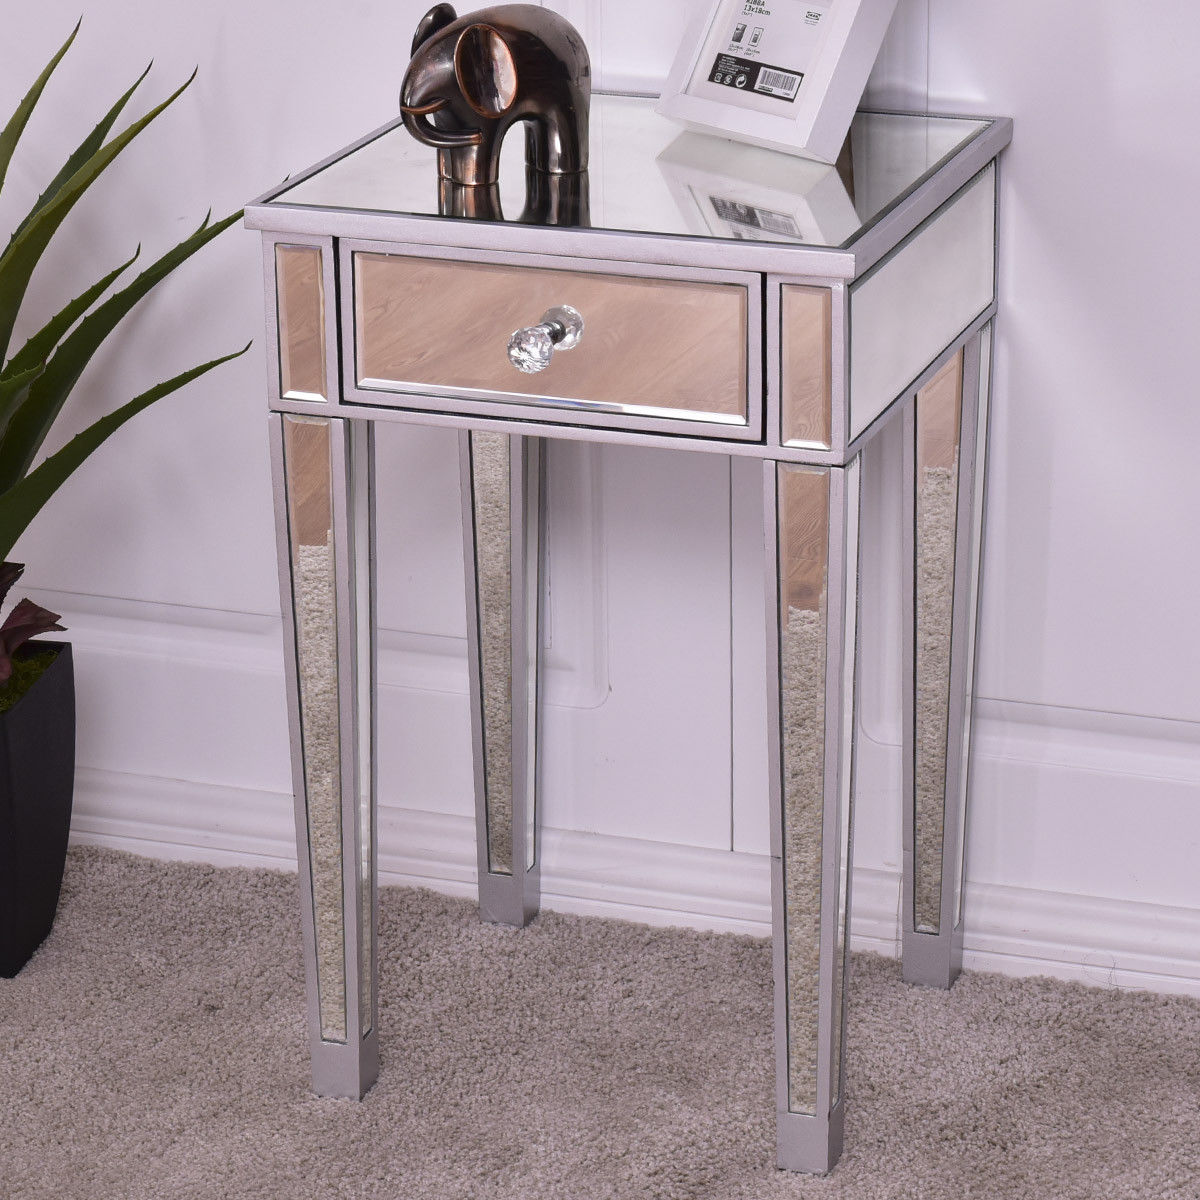 giantex mirrored accent table nightstand end luxury modern bedside storage cabinet with drawer coffee tables sofa center narrow white secretary desk grill cart worlds away rustic